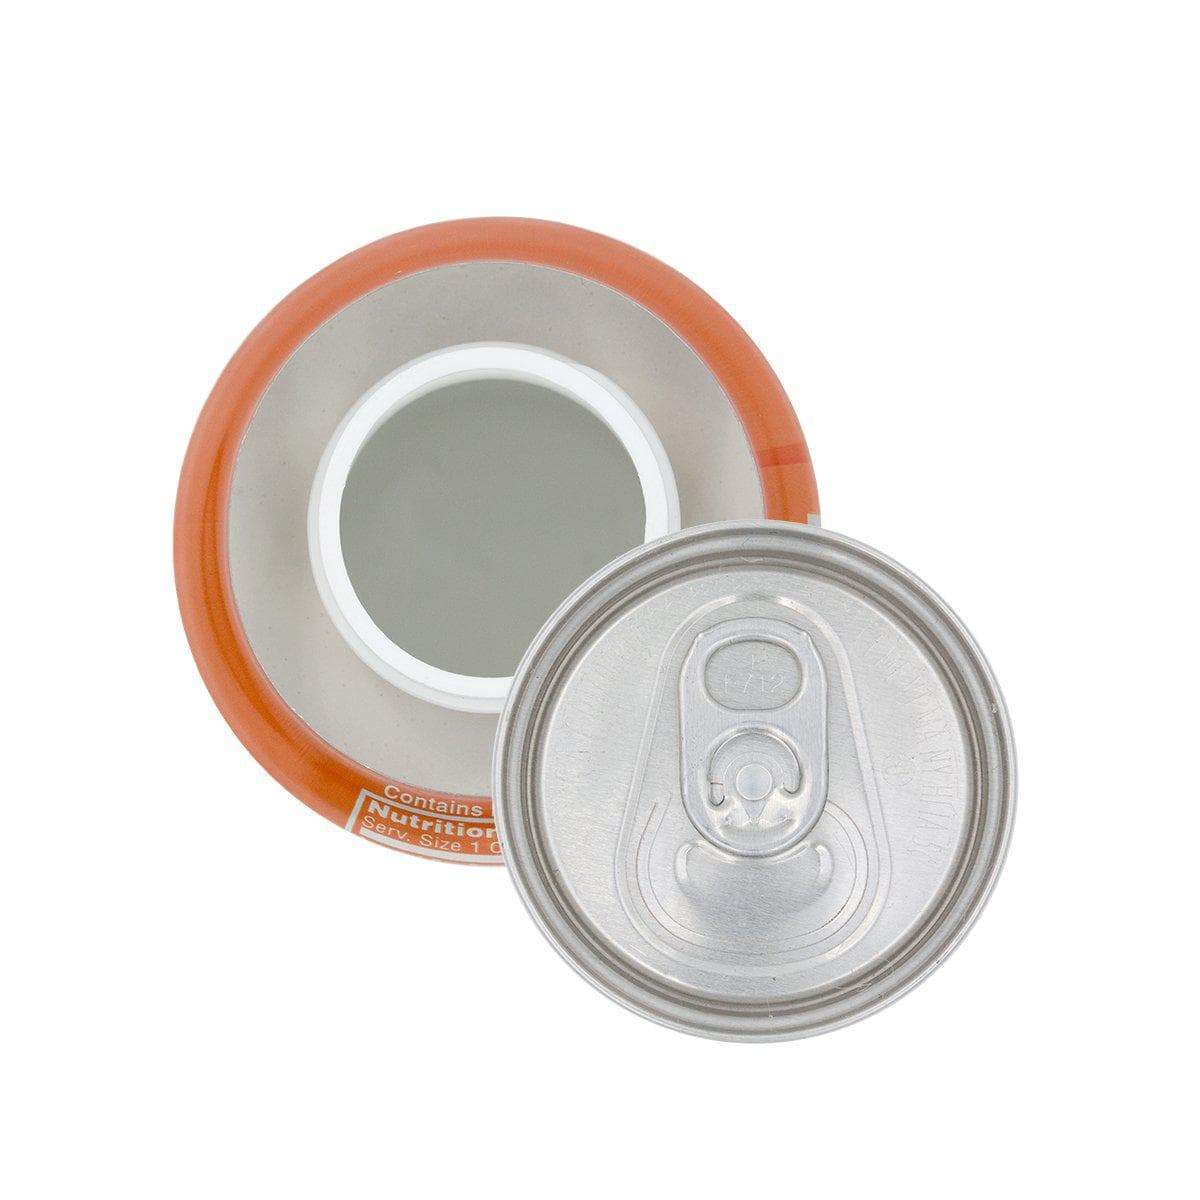 Top view of opened discreet soda stash storage container with realistic shape design of real fanta can